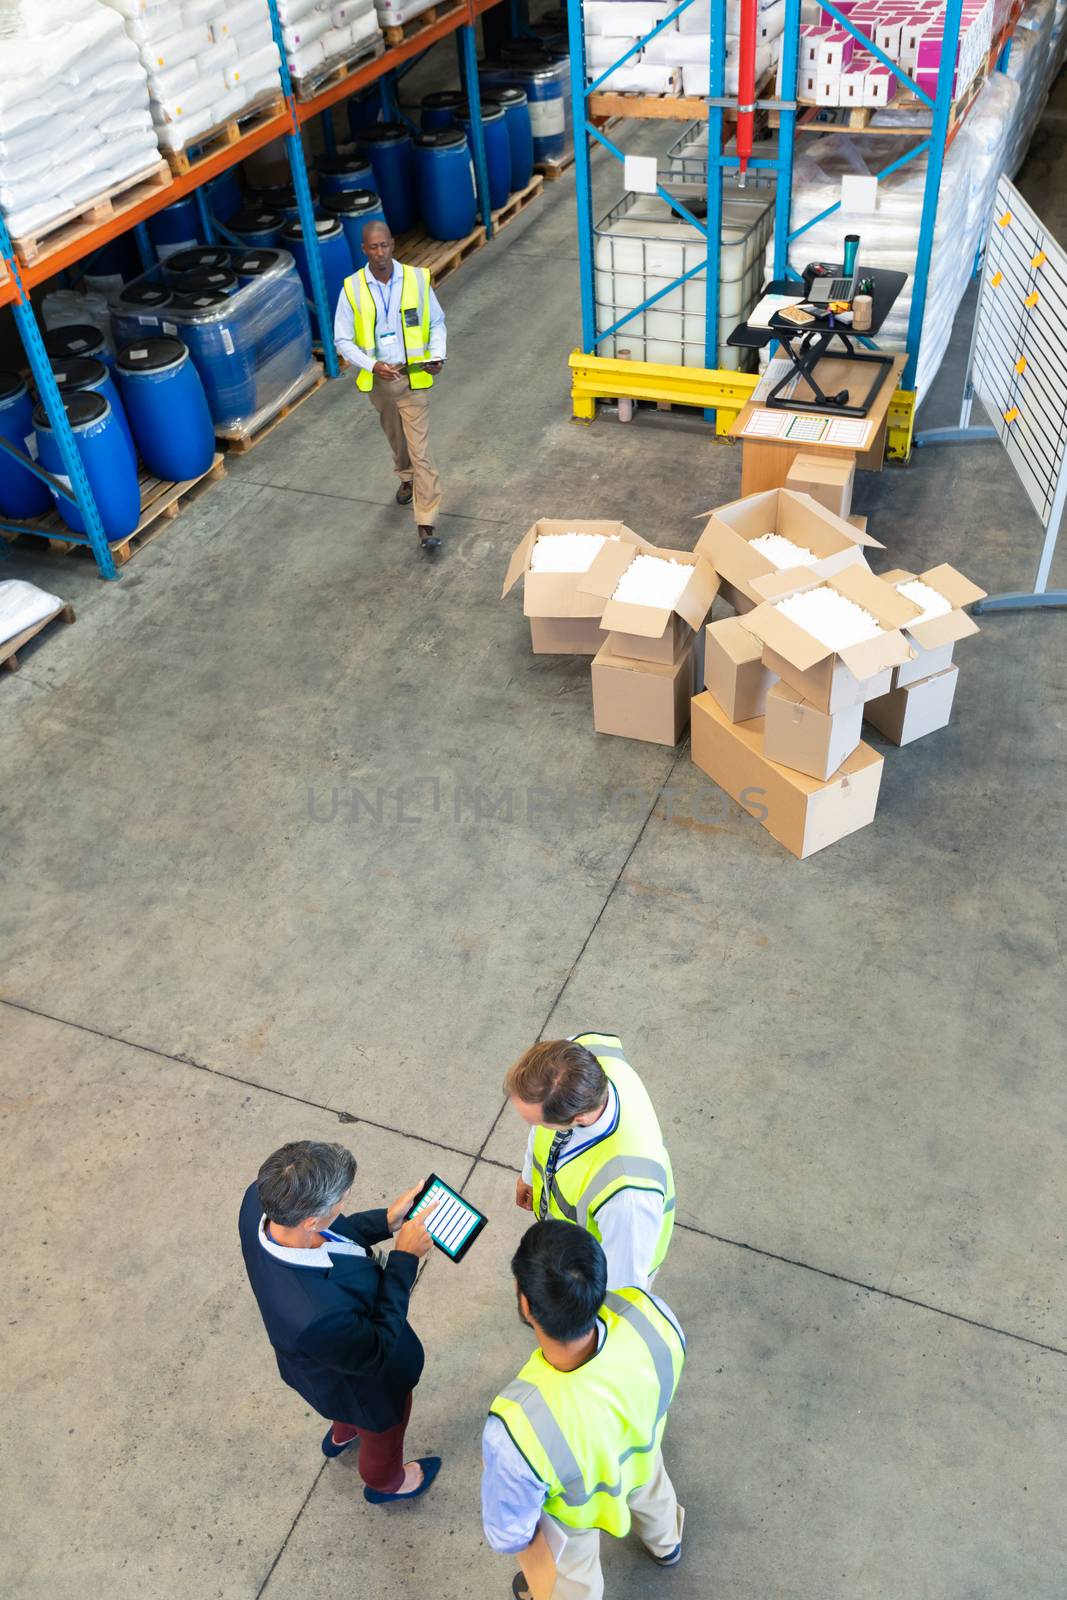 High angle view of diverse mature warehouse staff discussing over digital tablet in warehouse. This is a freight transportation and distribution warehouse. Industrial and industrial workers concept